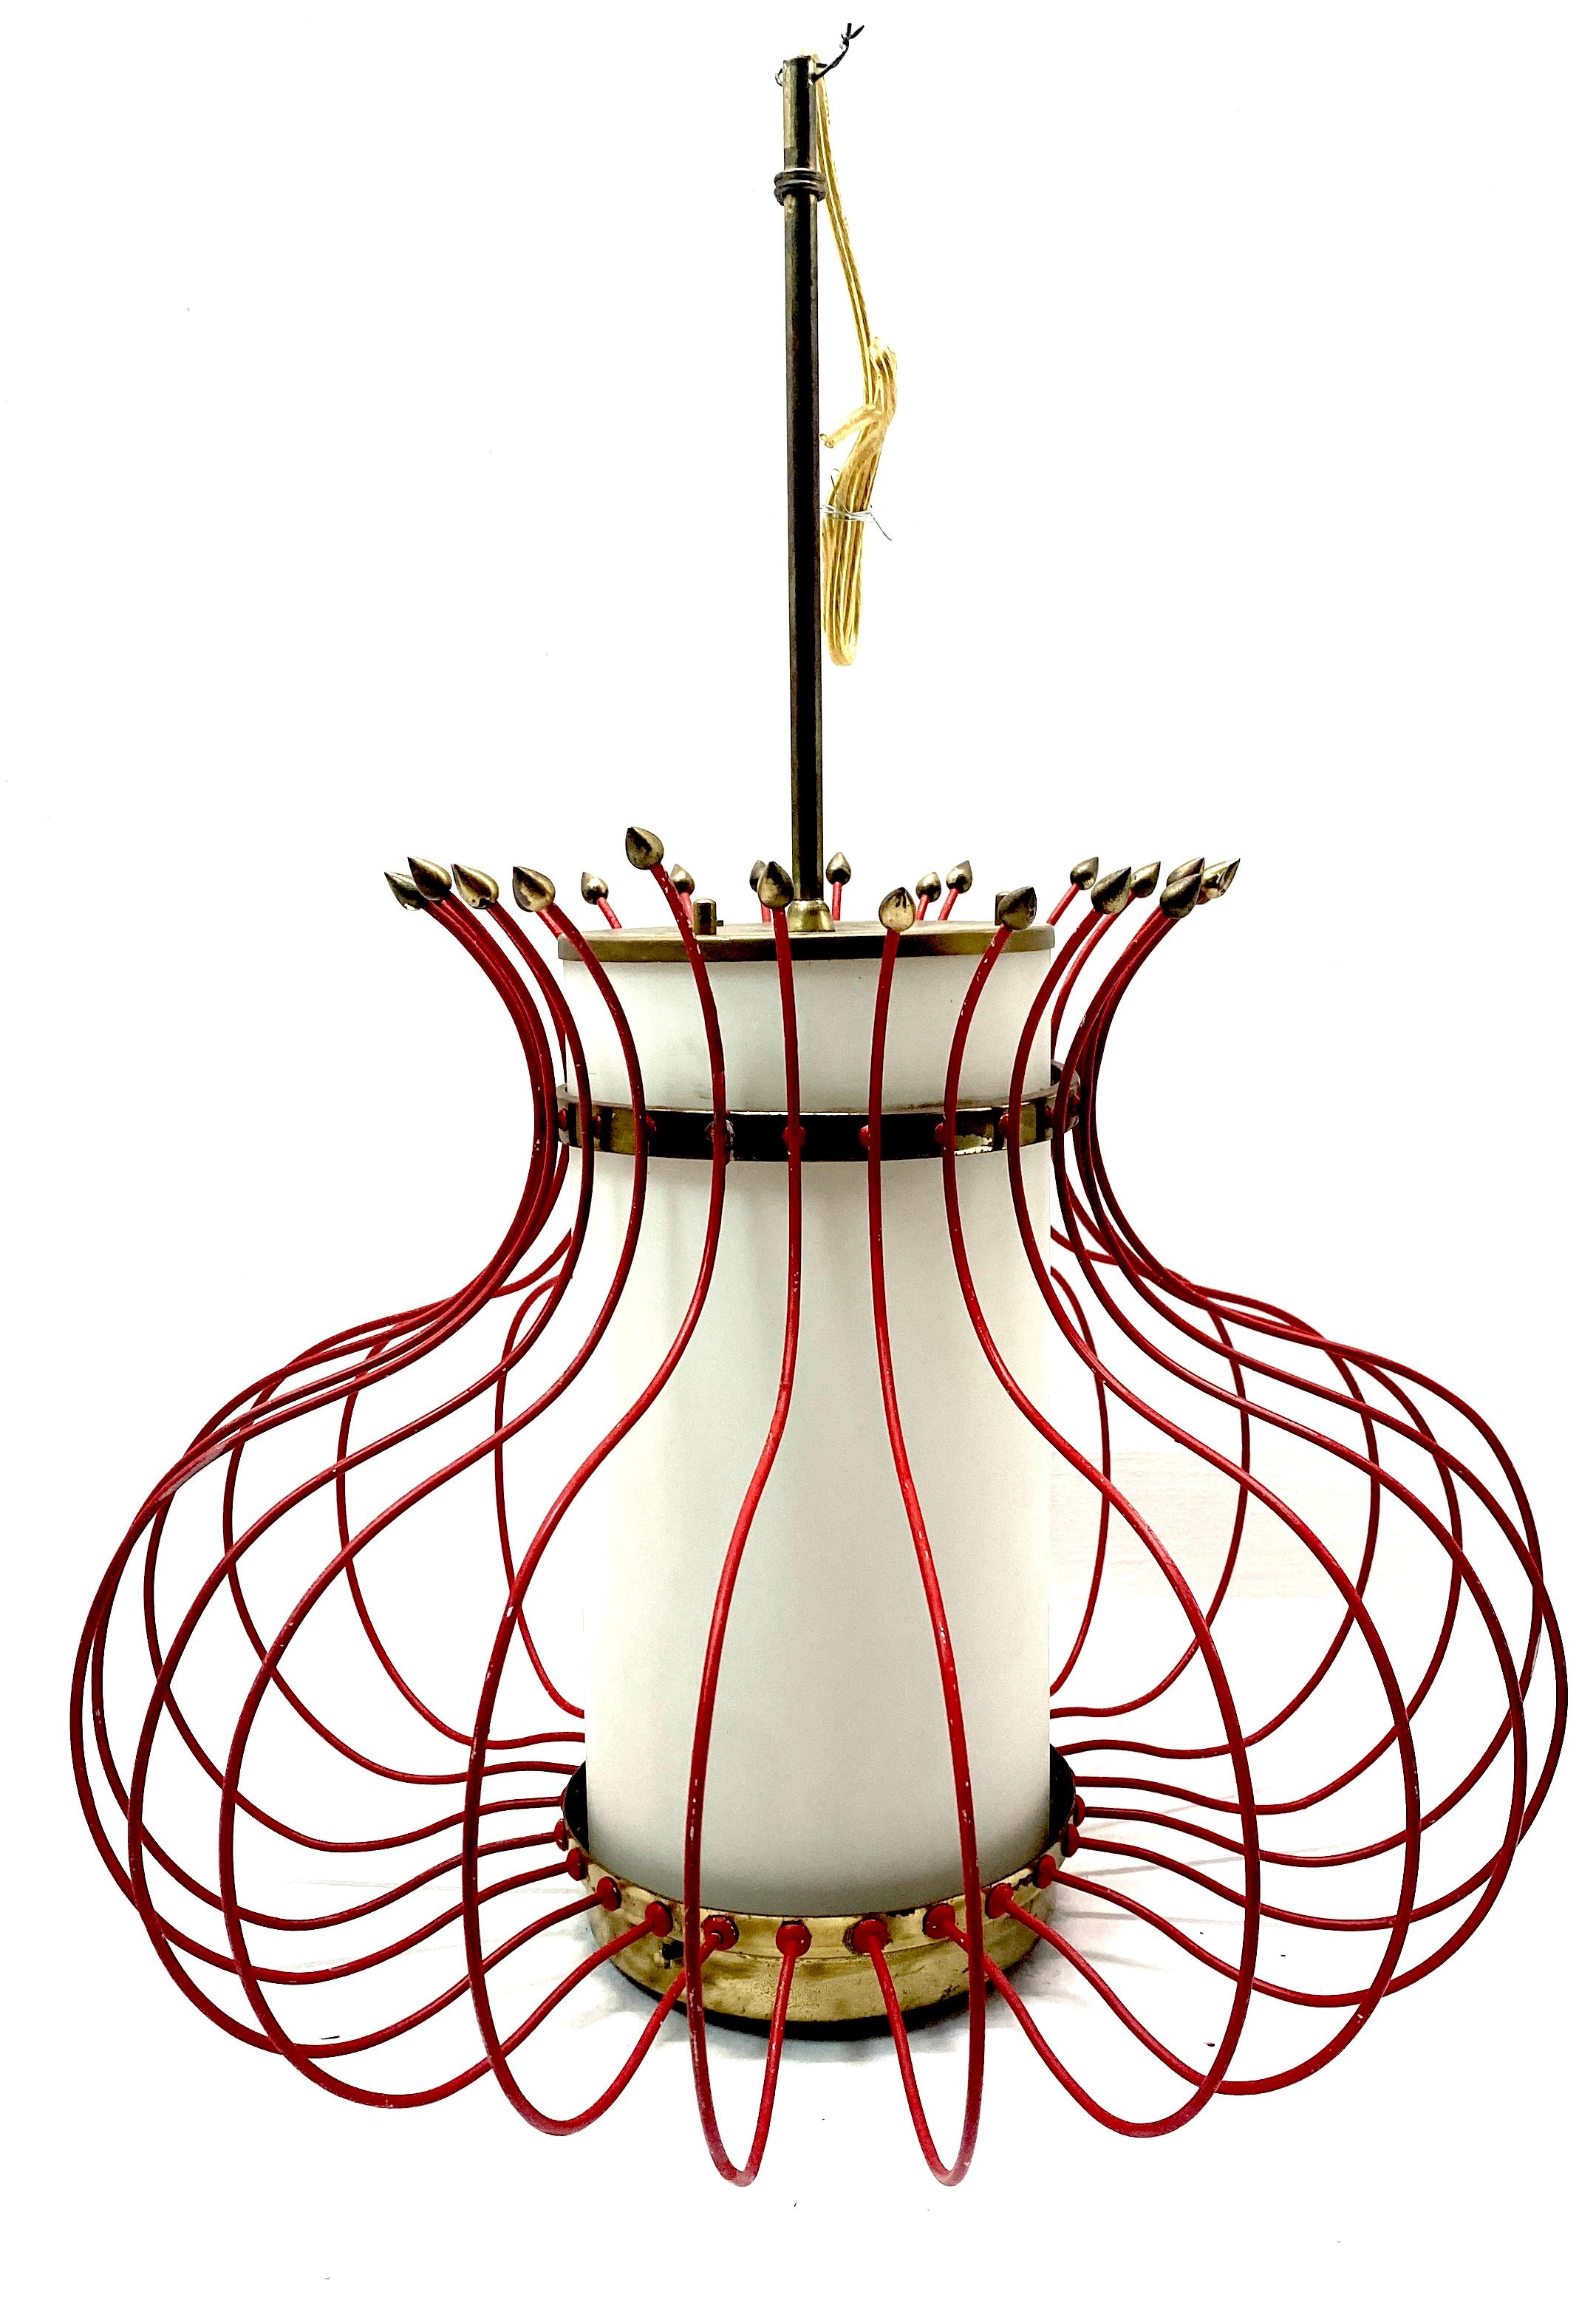 French Modern Red Enameled Brass Lantern/Chandelier
France, circa 1950s

A French Modern Red Enameled Brass Lantern/Chandelier from the 1950s. This captivating work features a distinctive down-swept design with a distinct red enameled brass frame